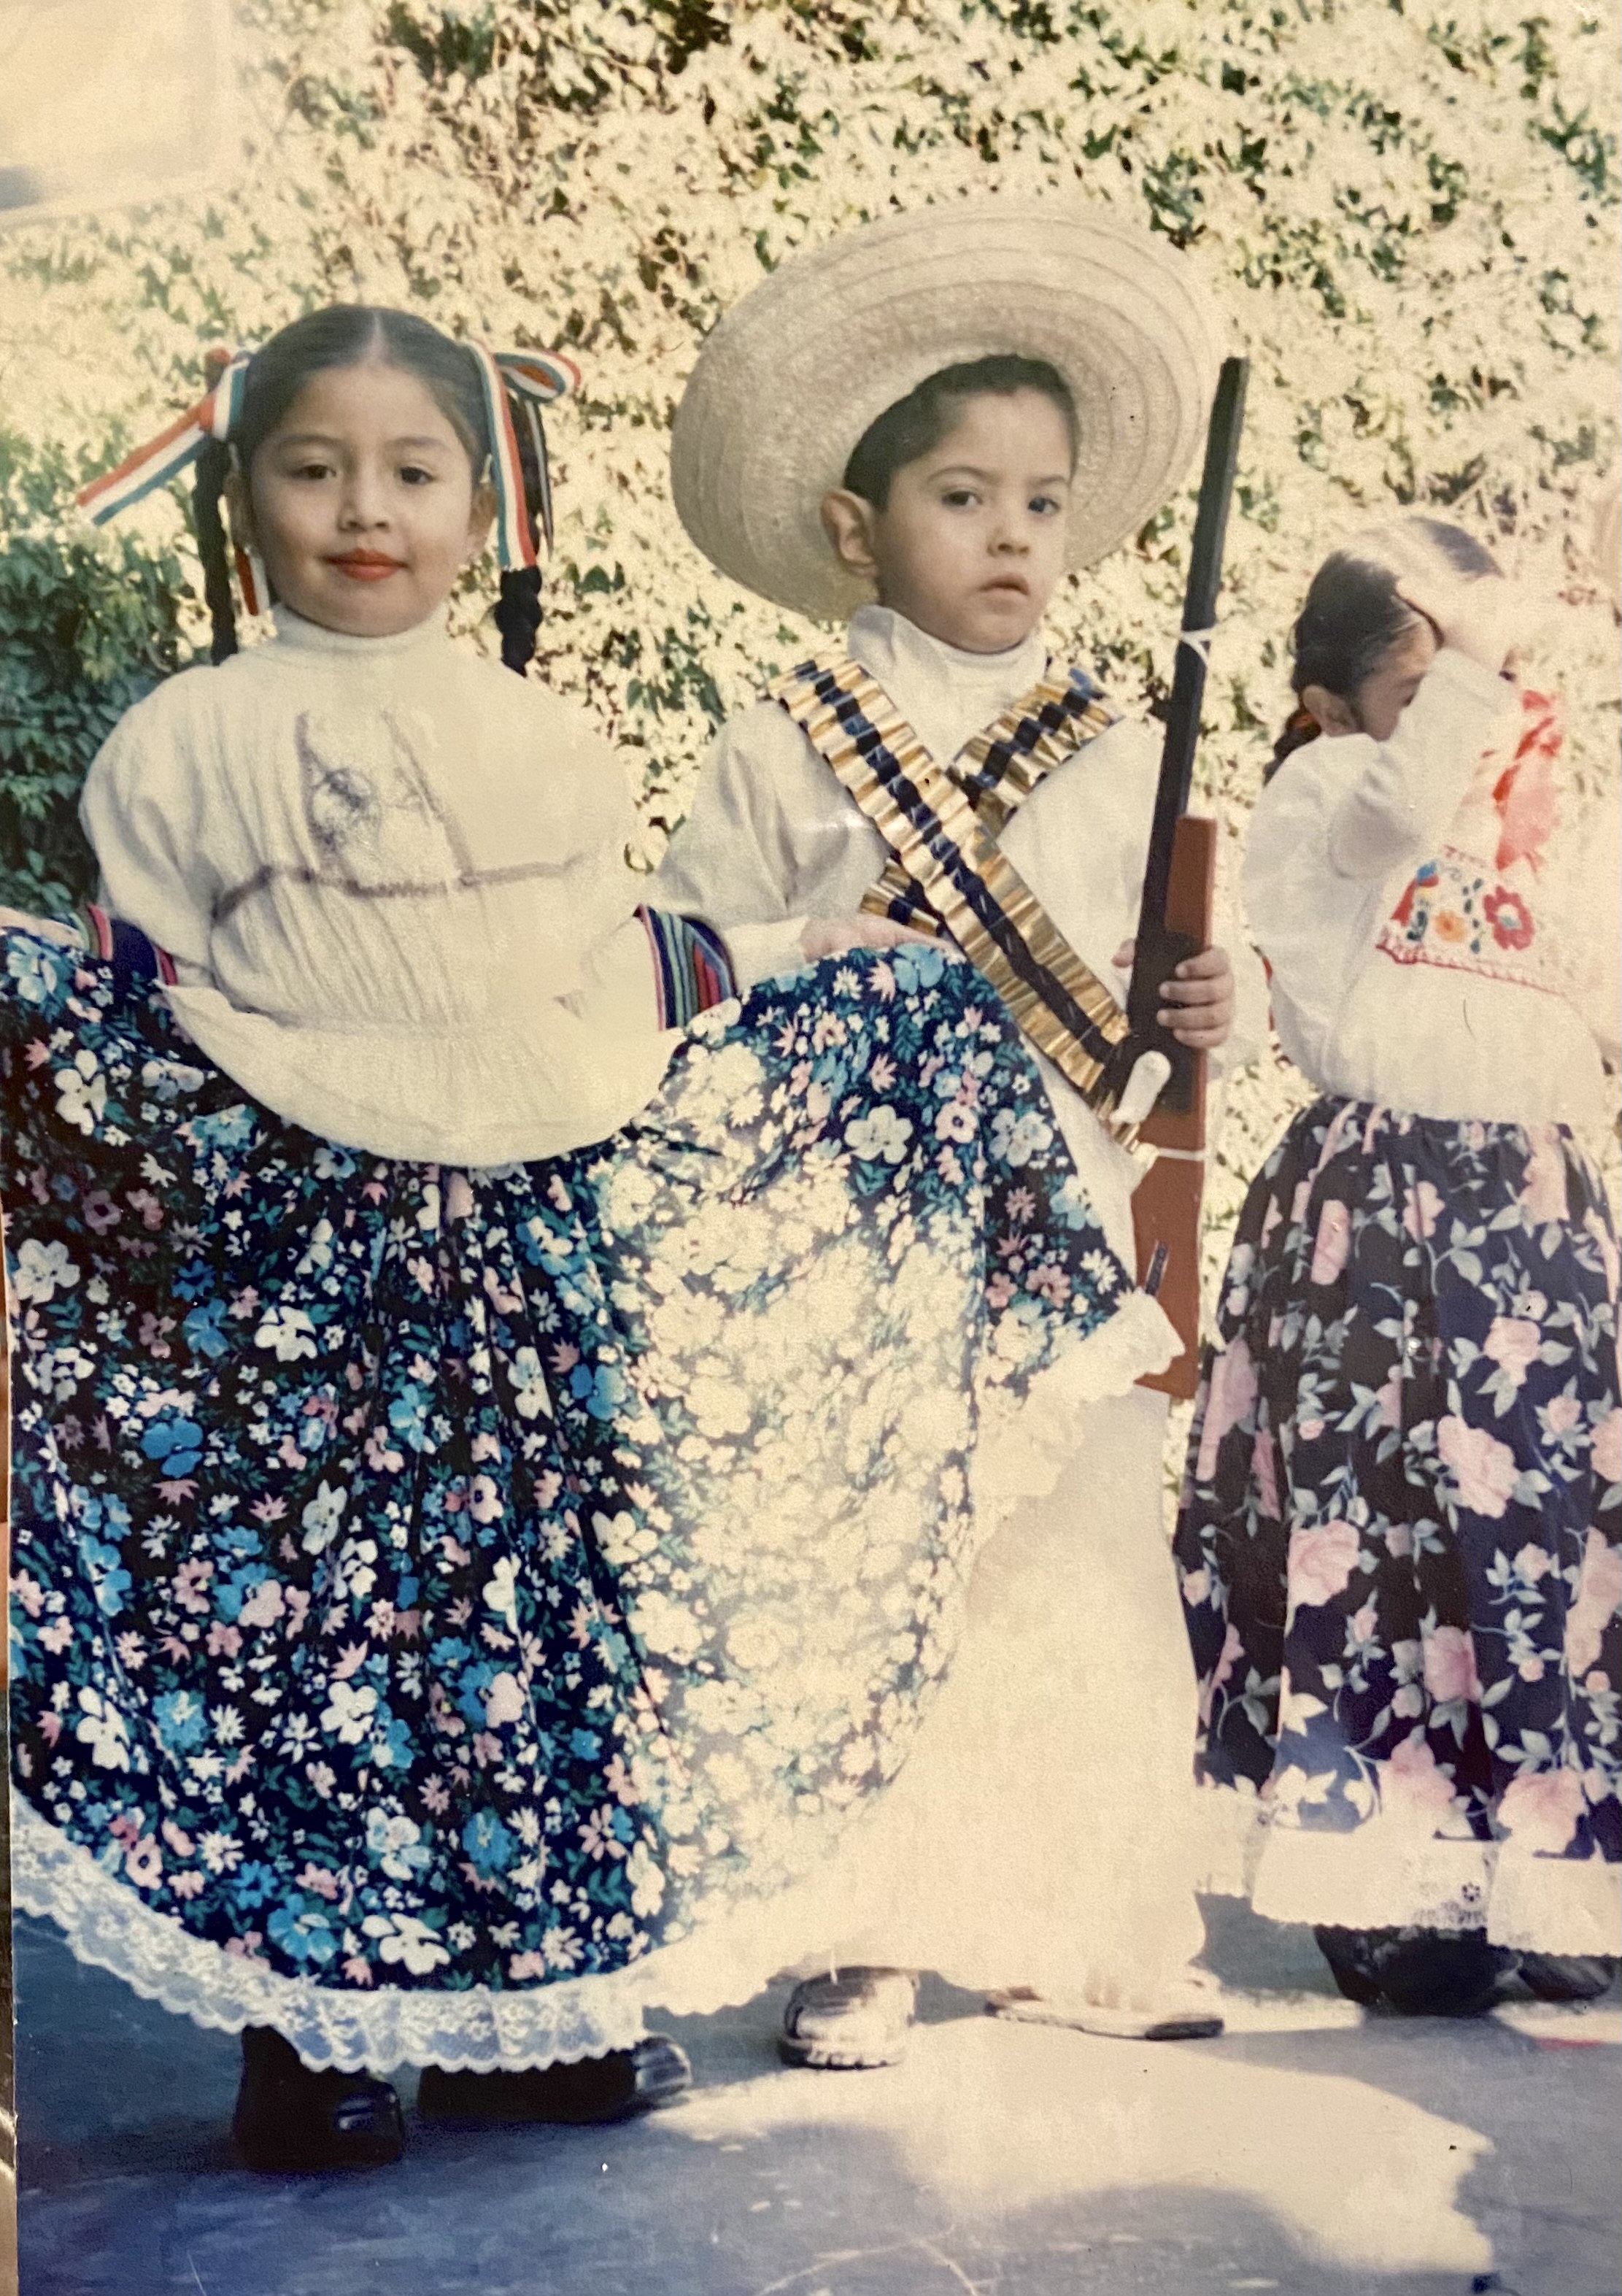 Alvarez at age 5 poses with a boy dressed in costume